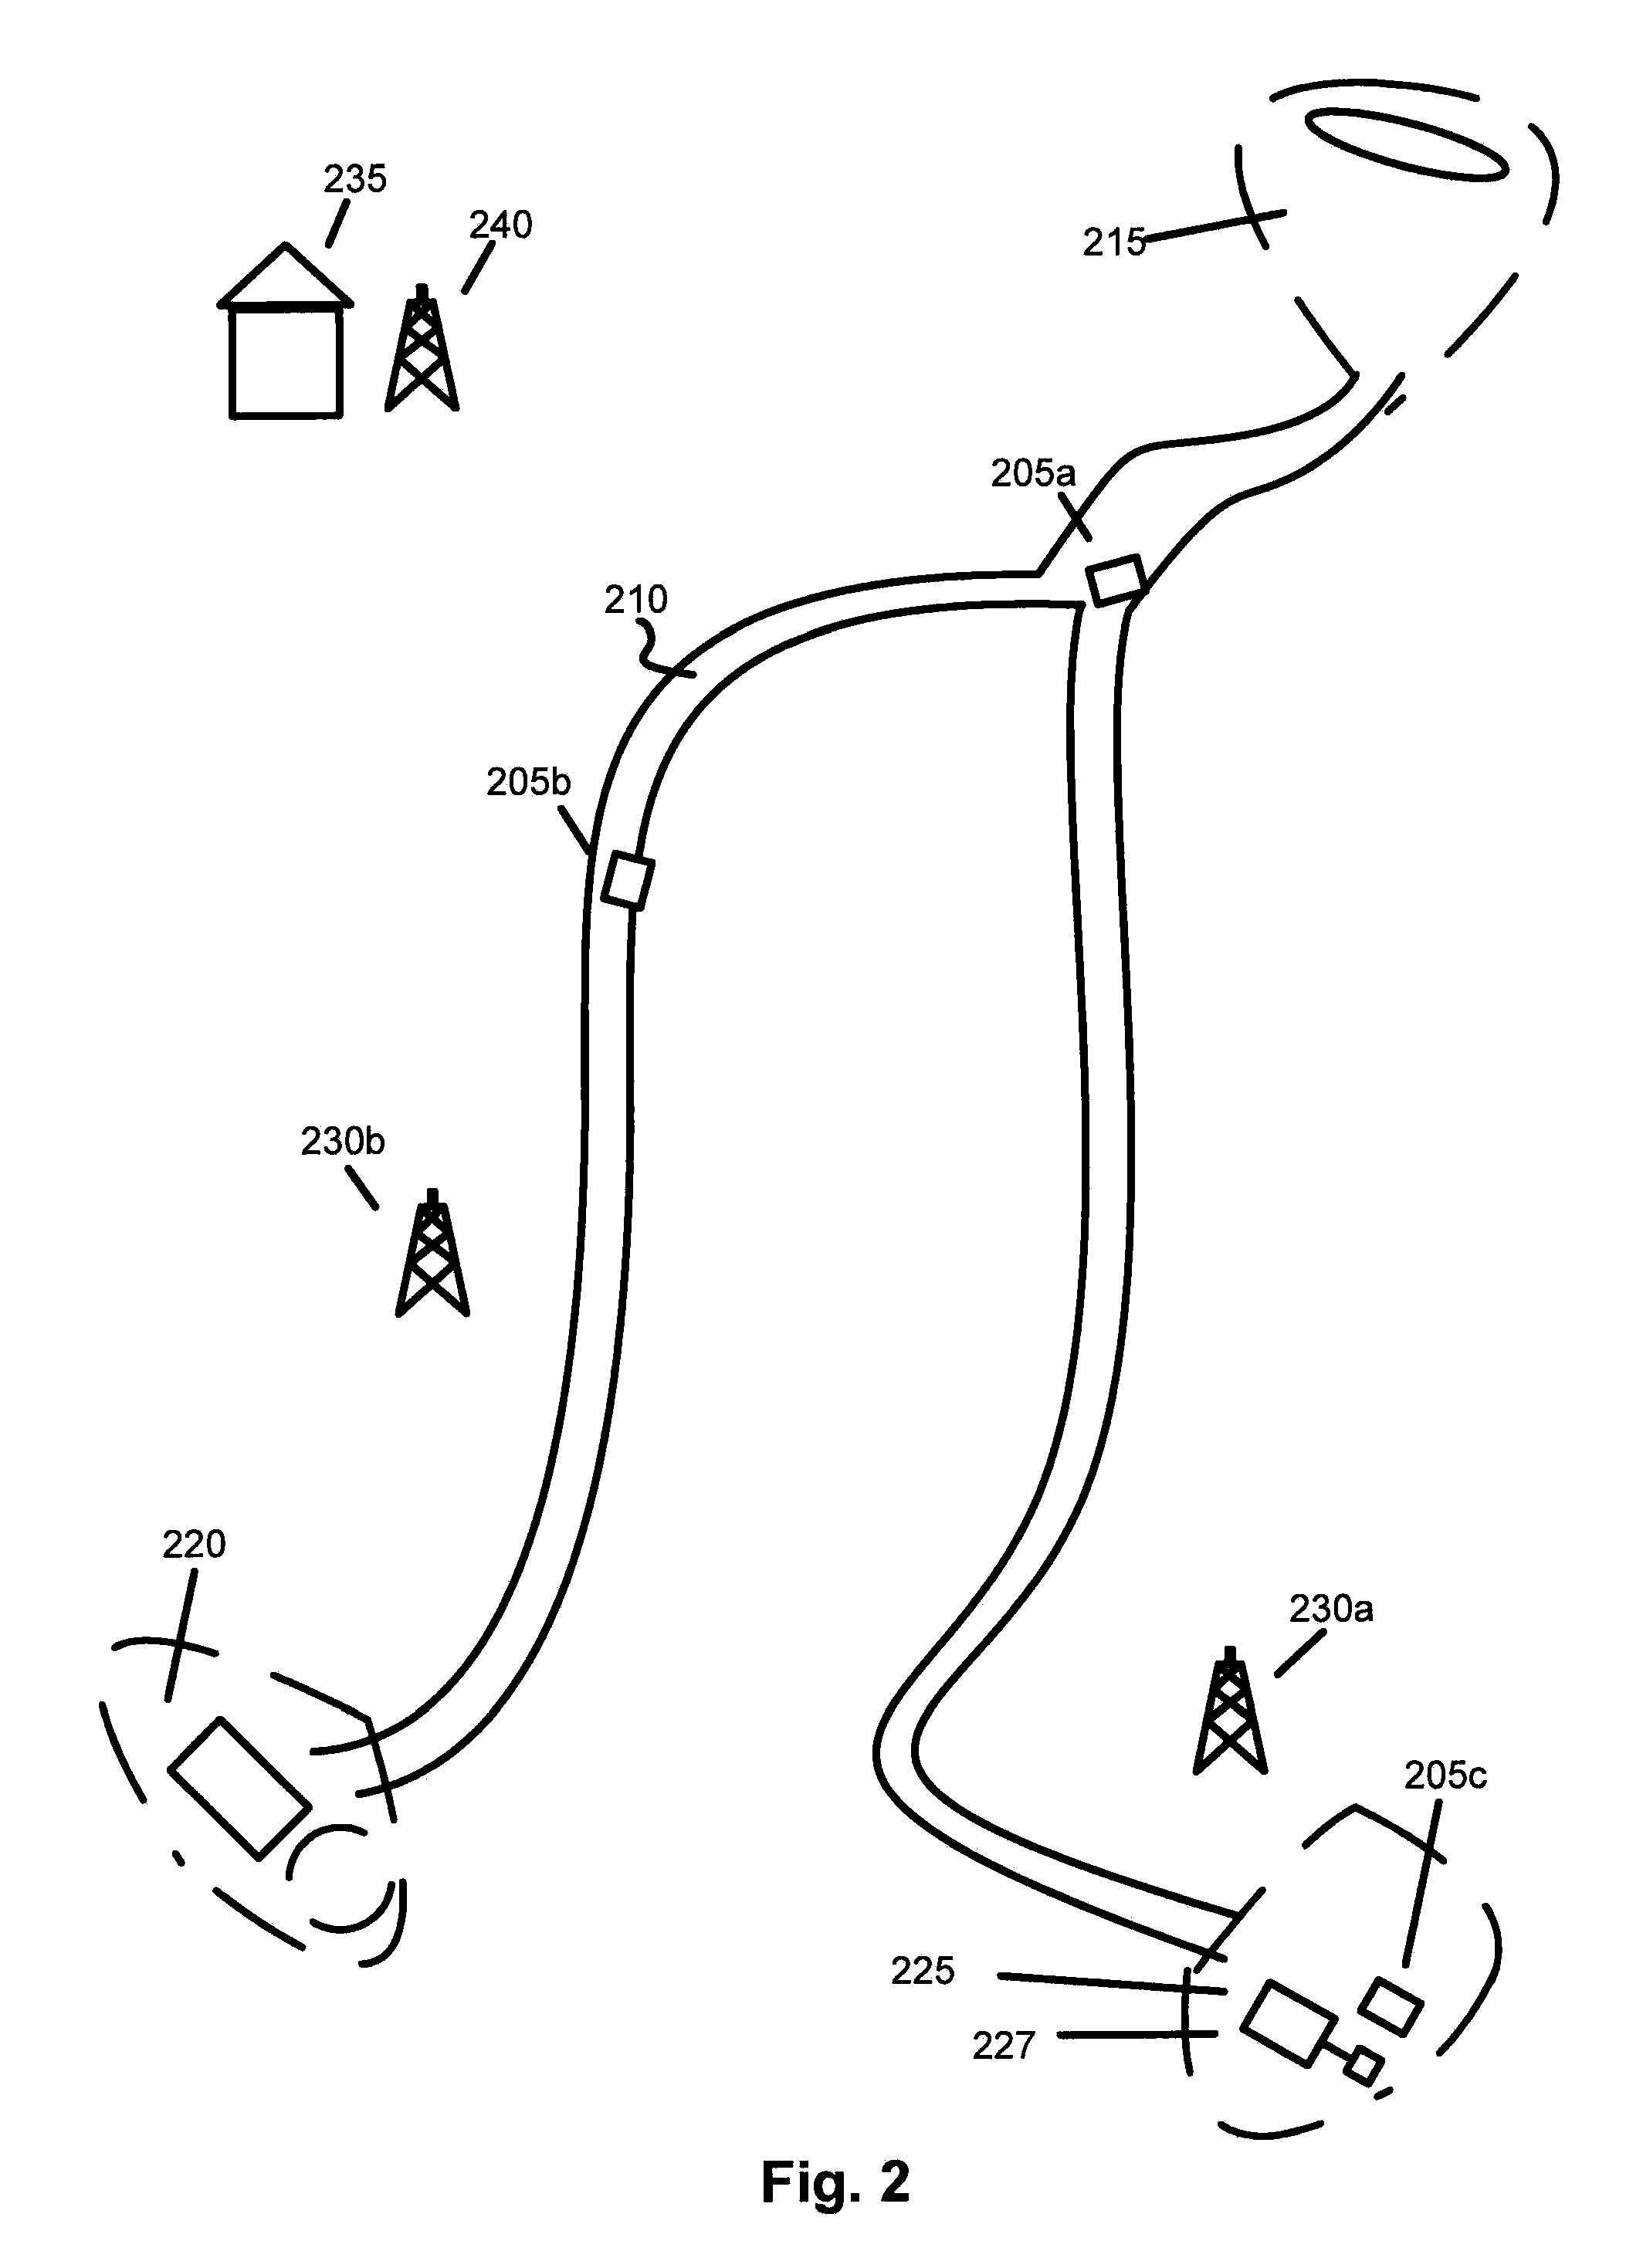 Guided maneuvering of a mining vehicle to a target destination